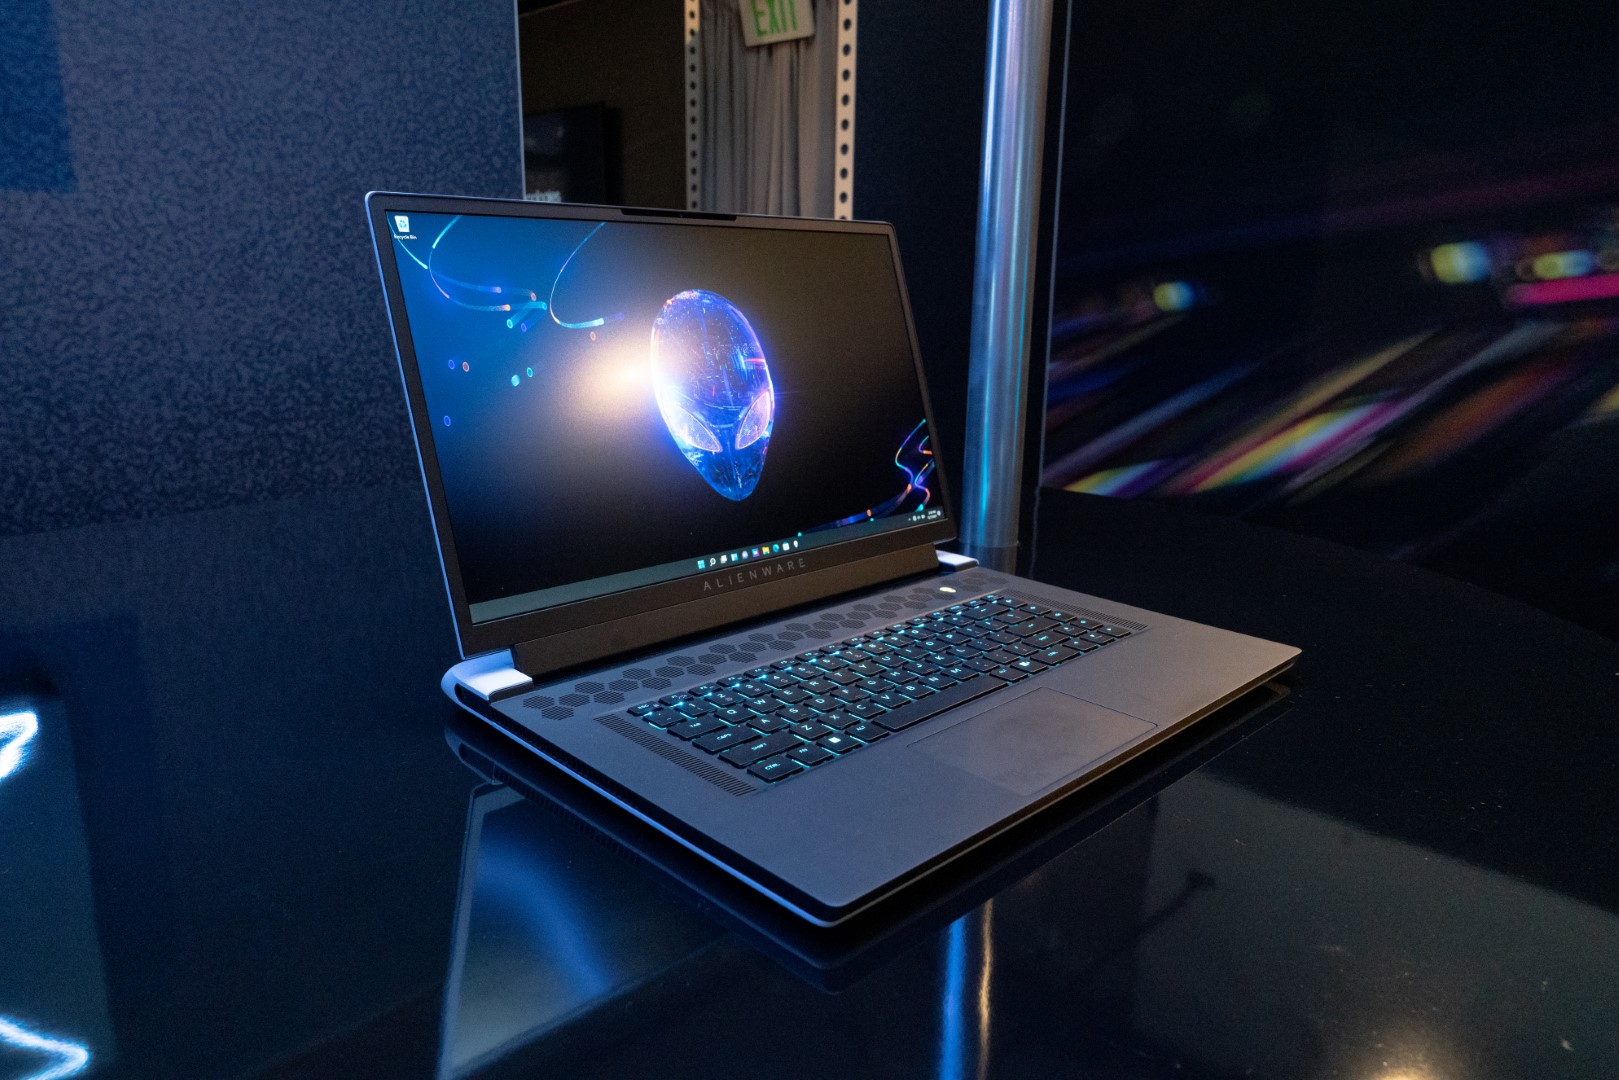 Sleek Alienware x17 R2 launched with unlocked Core i9-12900HK, RTX 